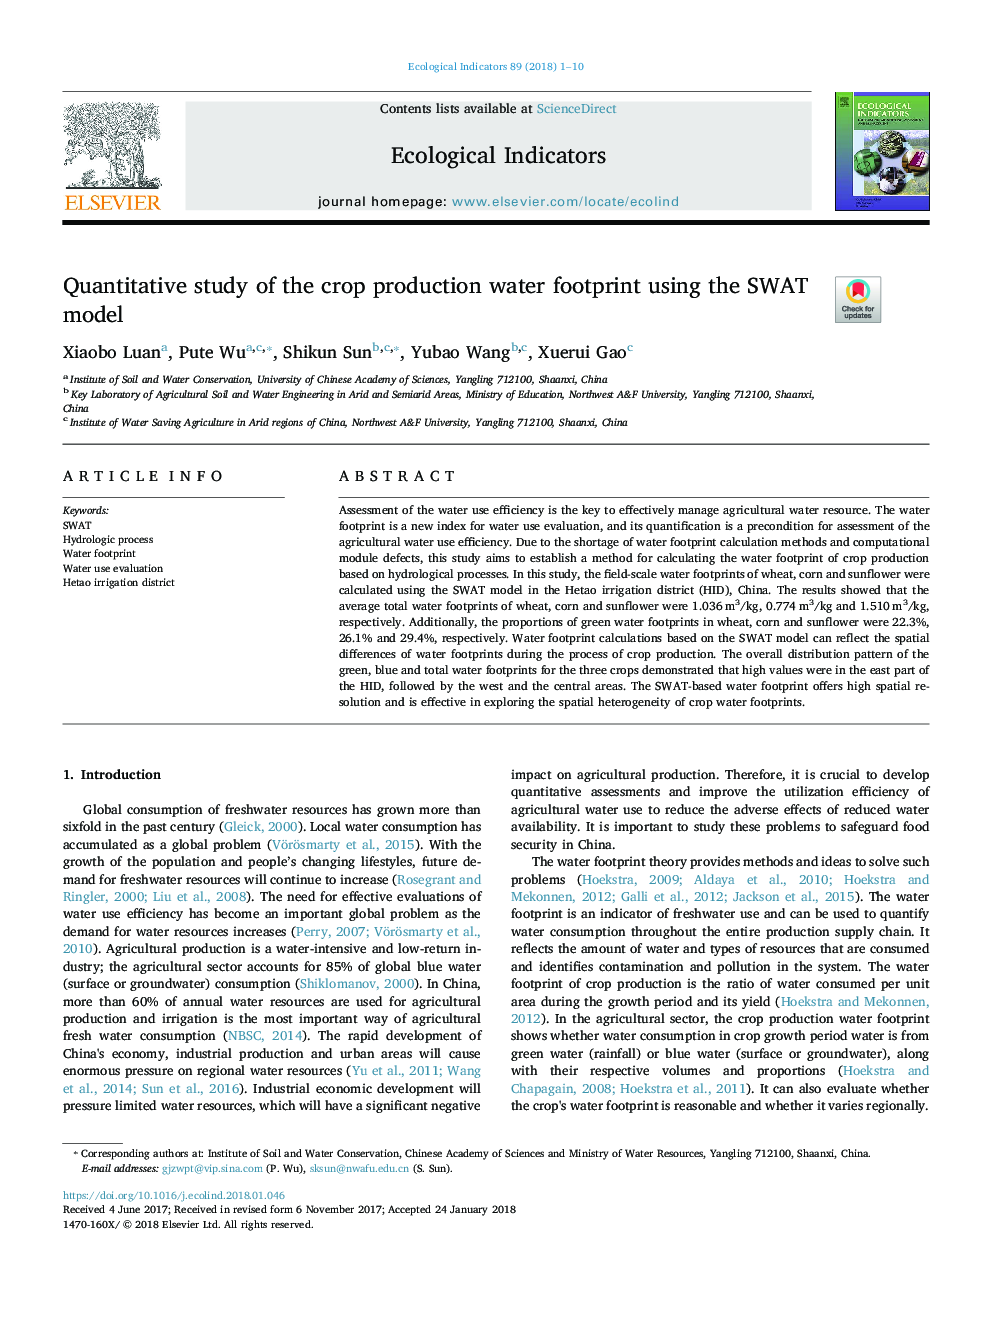 Quantitative study of the crop production water footprint using the SWAT model